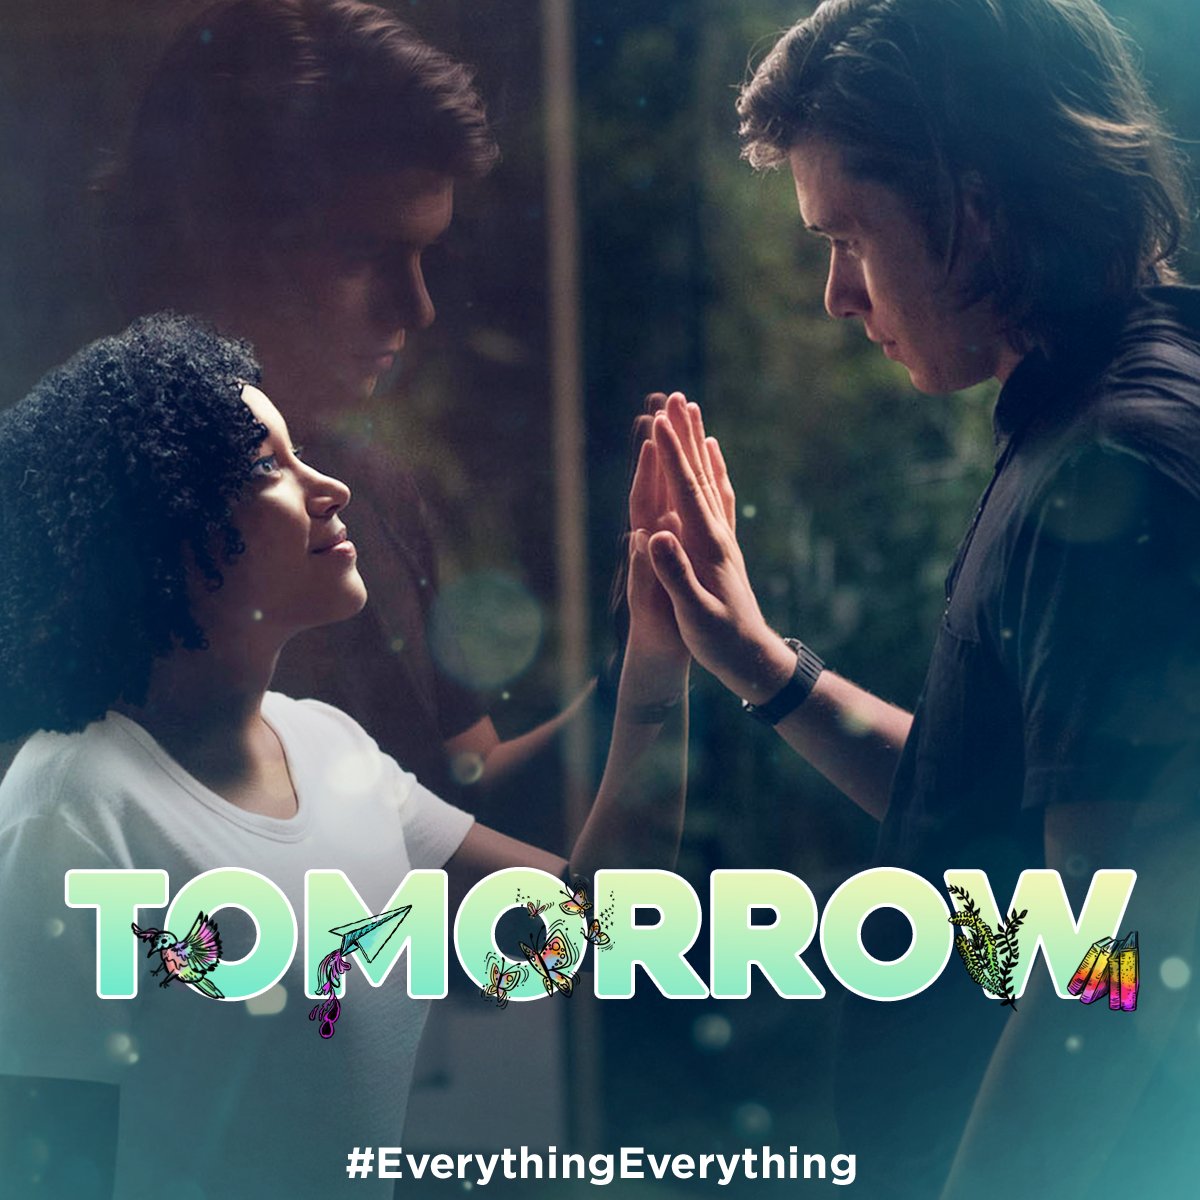 TOMORROW, Maddy & Olly risk everything for love. #EverythingEverything Get tickets: tickets.everythingeverythingmovie.com